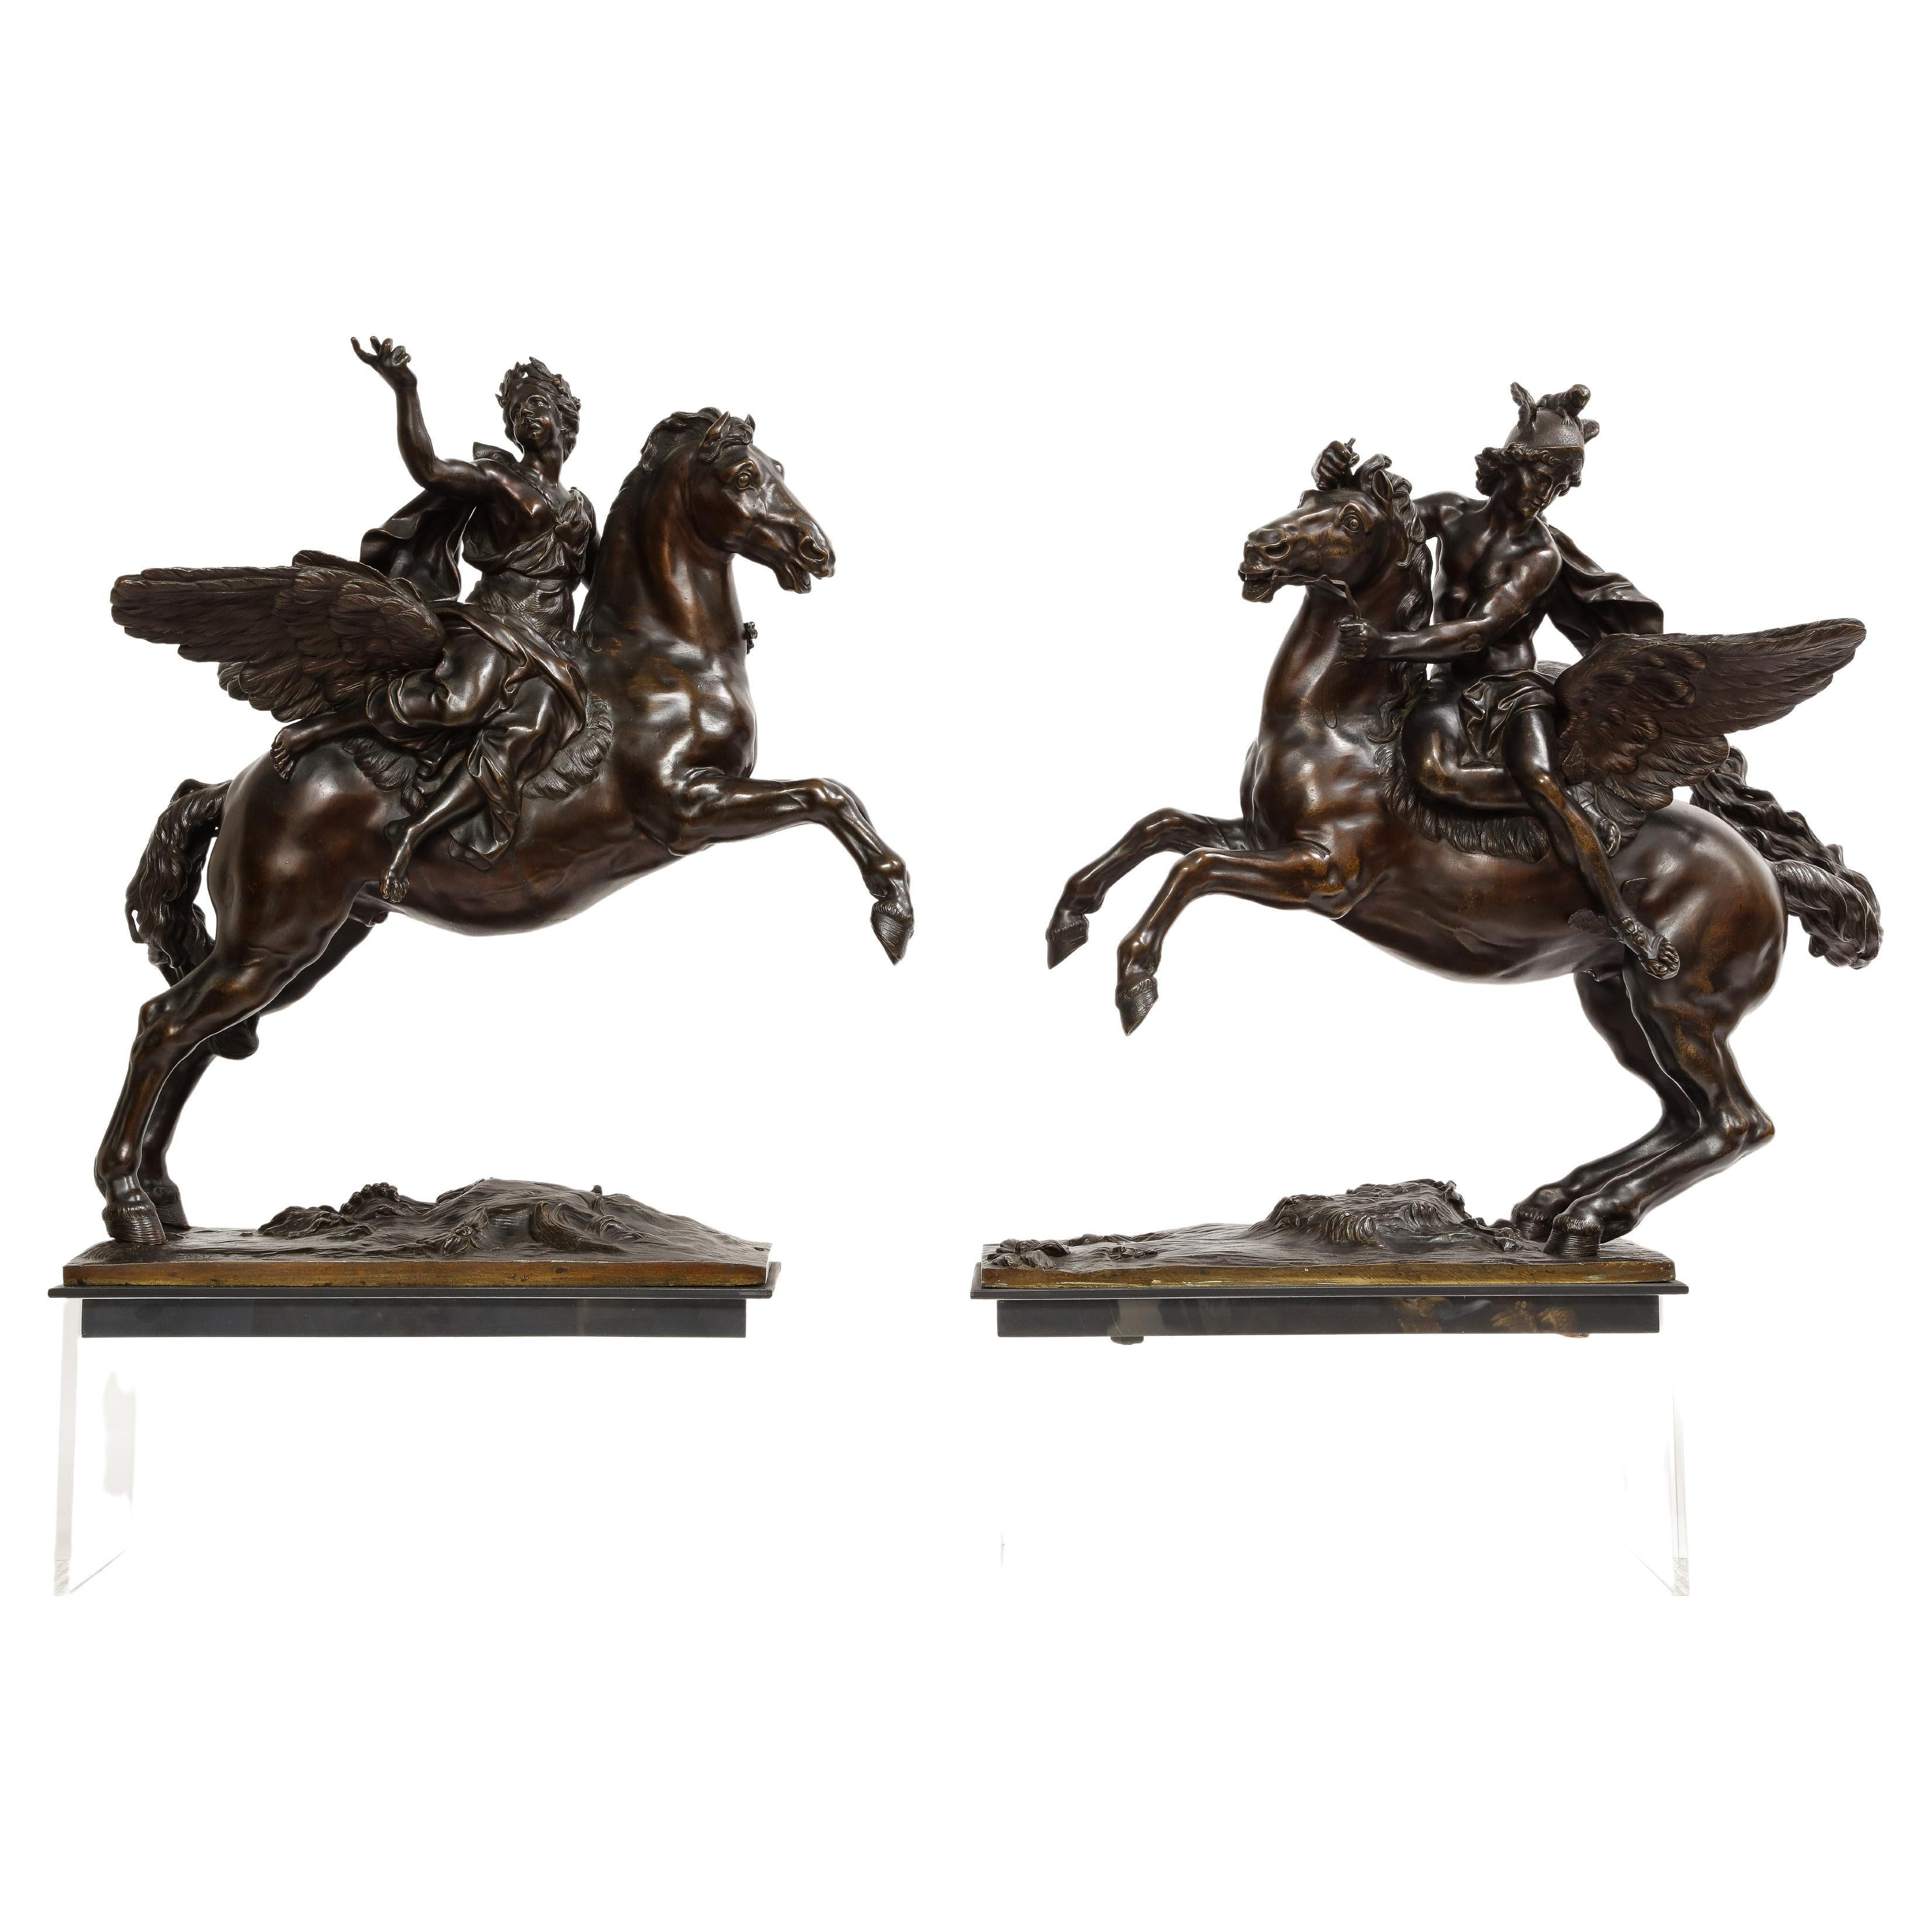 Pr. French 19th C. Bronze Groups Fame & Mercury After Models by Antoine Coysevox For Sale